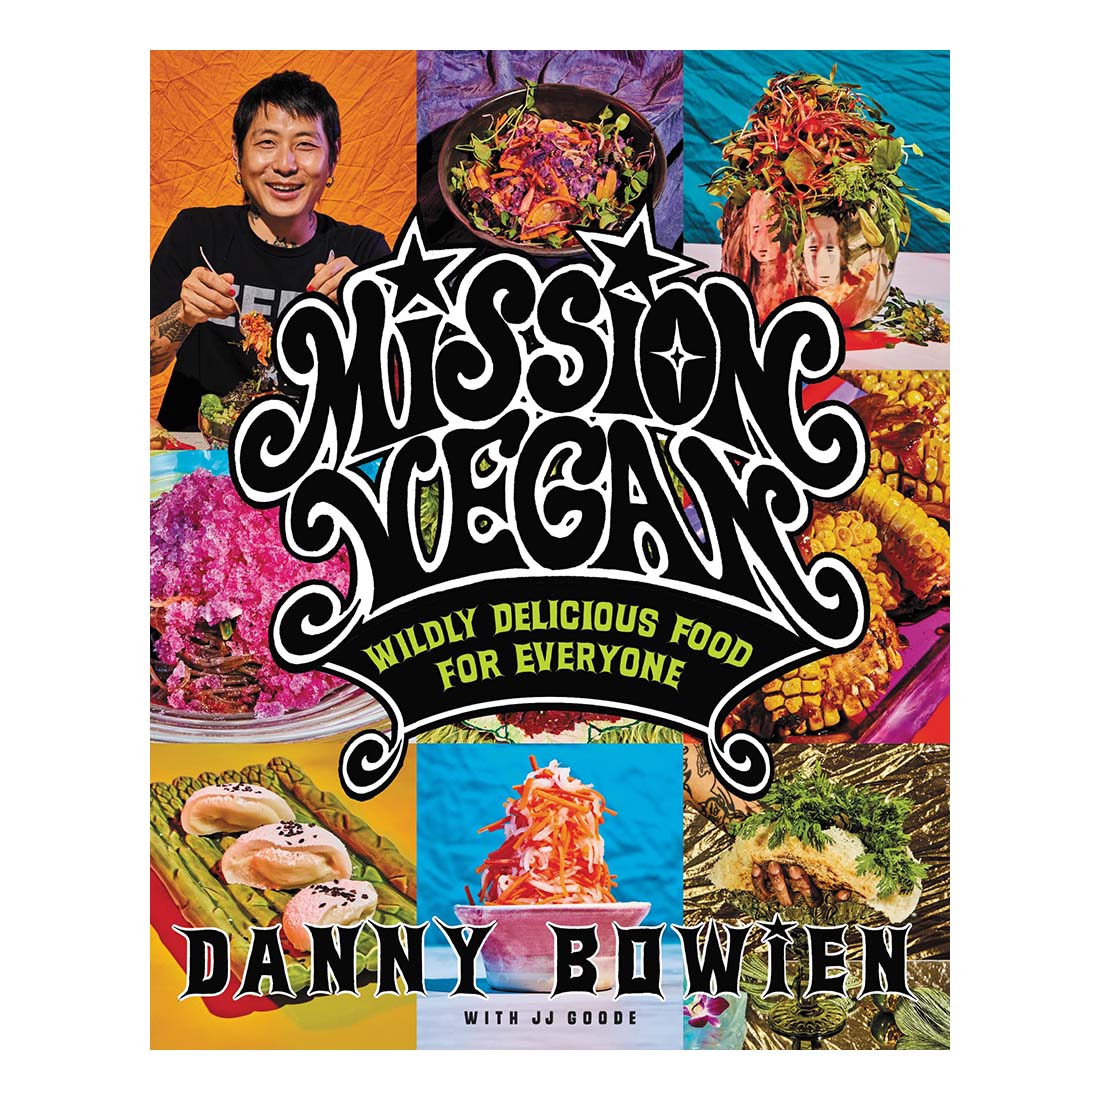 Mission Vegan: Wildly Delicious Food for Everyone